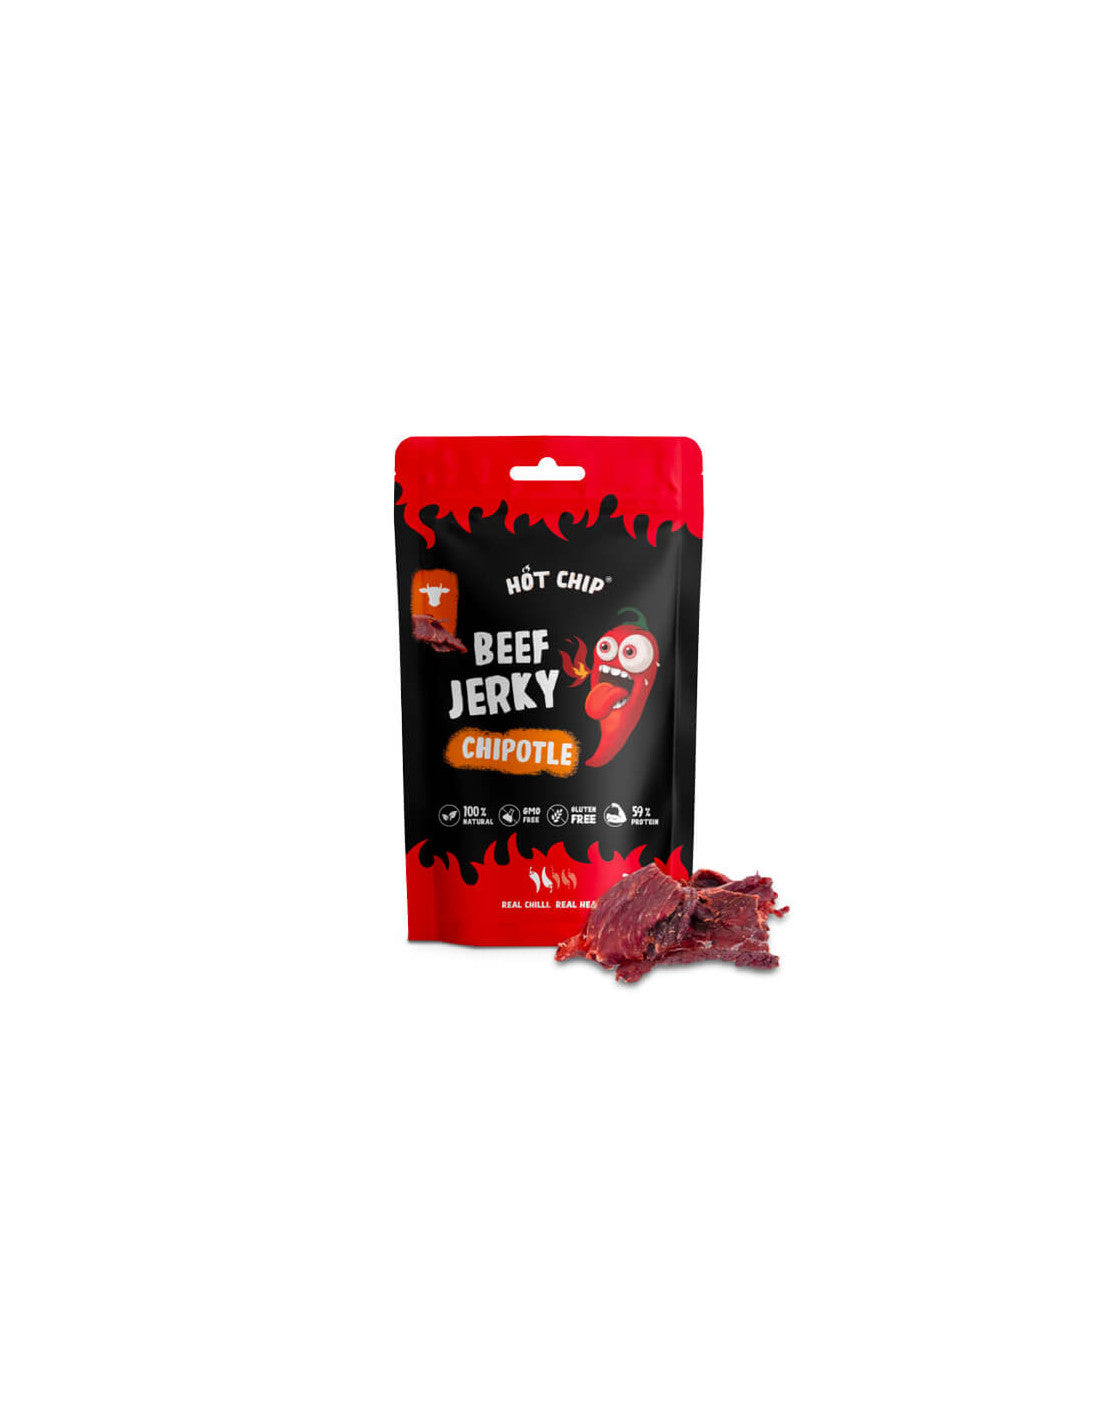 Hot Chip Beef Jerky Chipotle